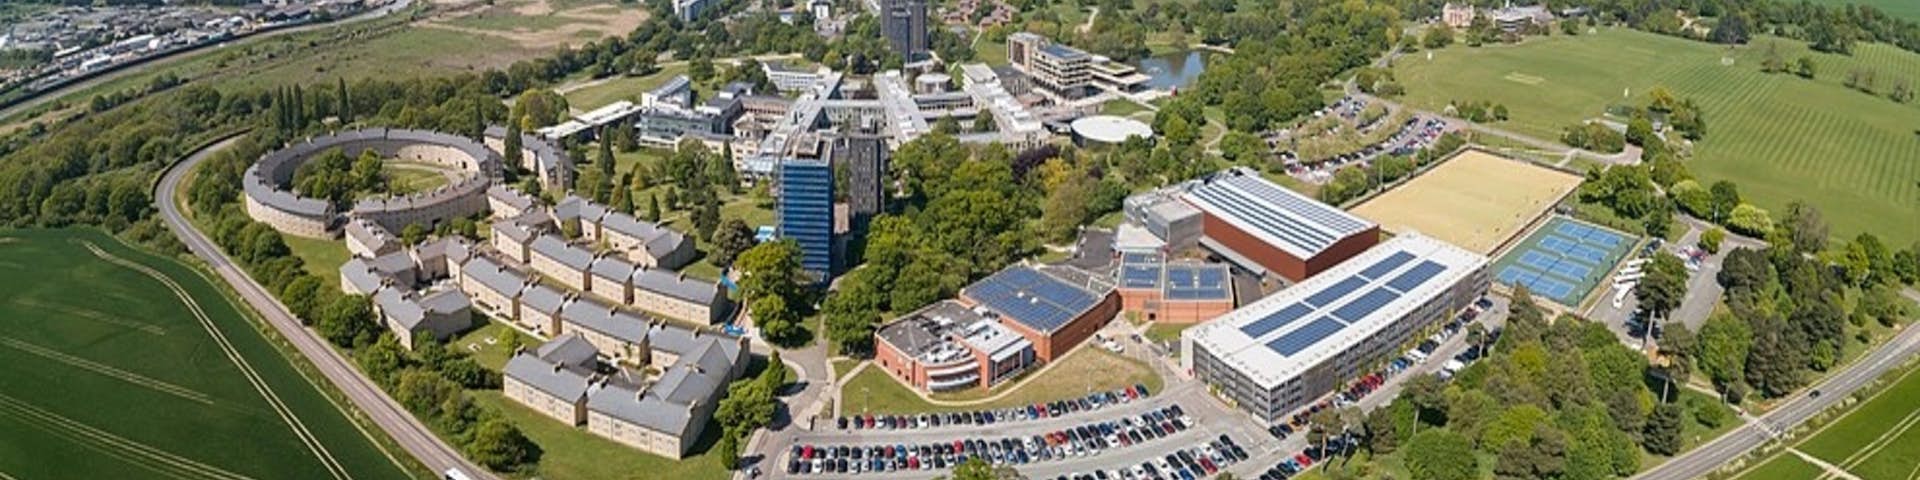 Banking and Finance at University of Essex 